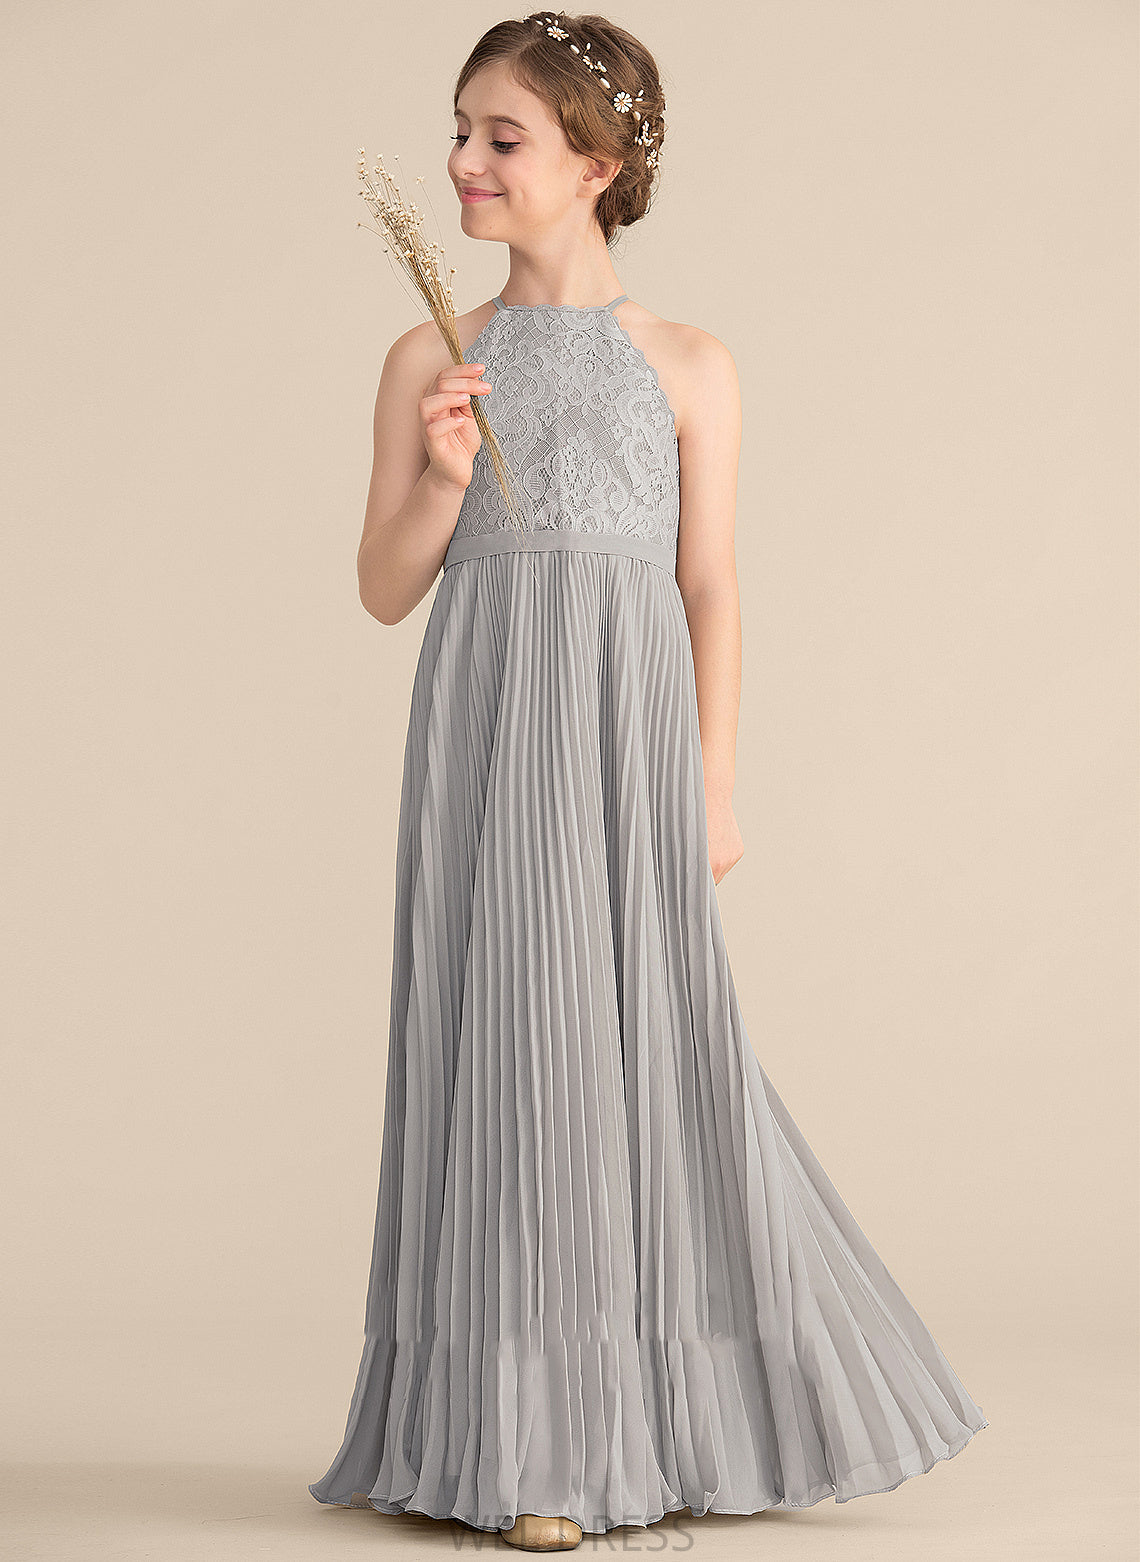 Lace Chiffon Junior Bridesmaid Dresses Neck Scoop With A-Line Hallie Floor-Length Pleated